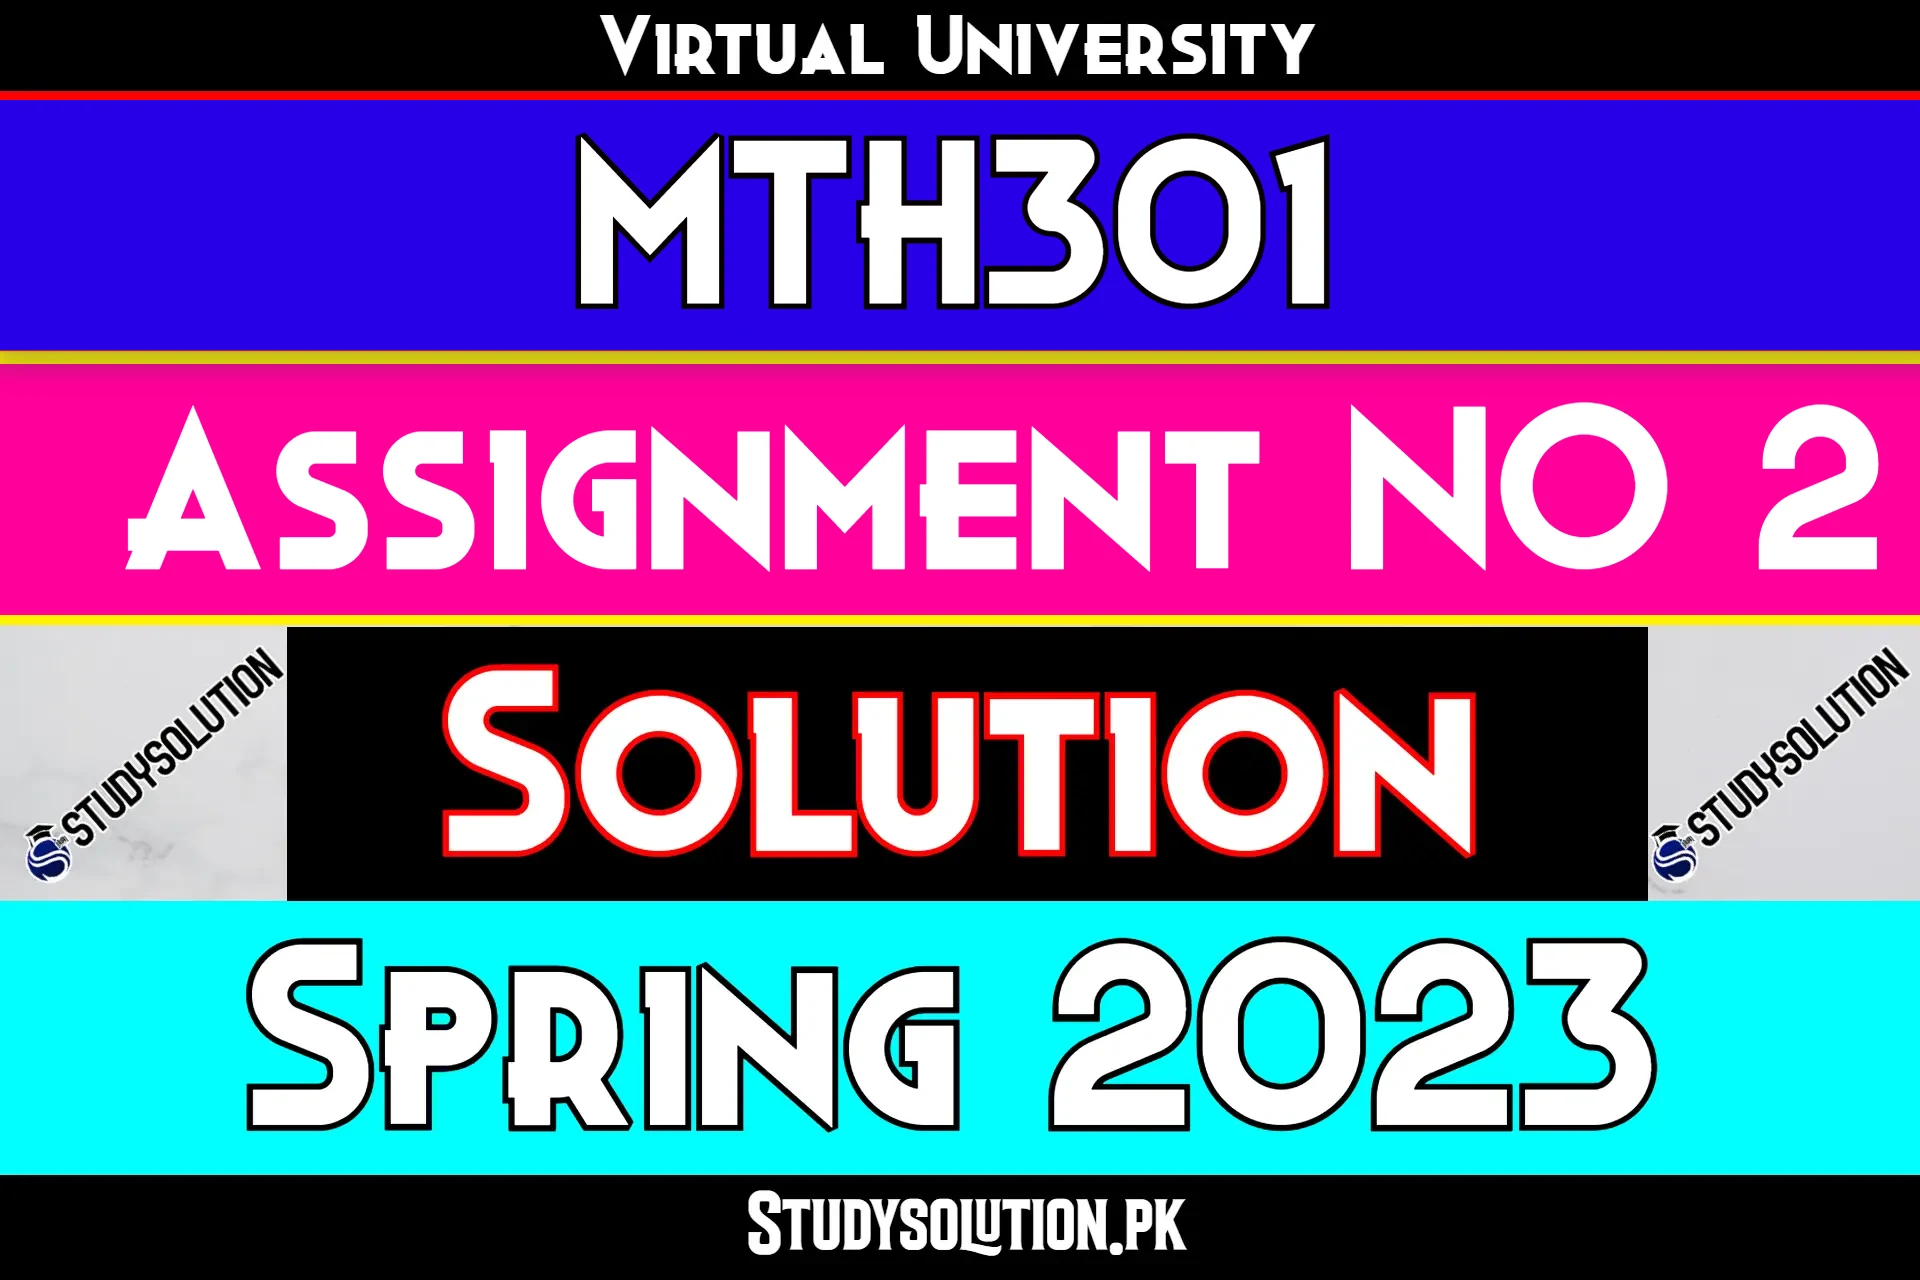 MTH301 Assignment No 2 Solution Spring 2023